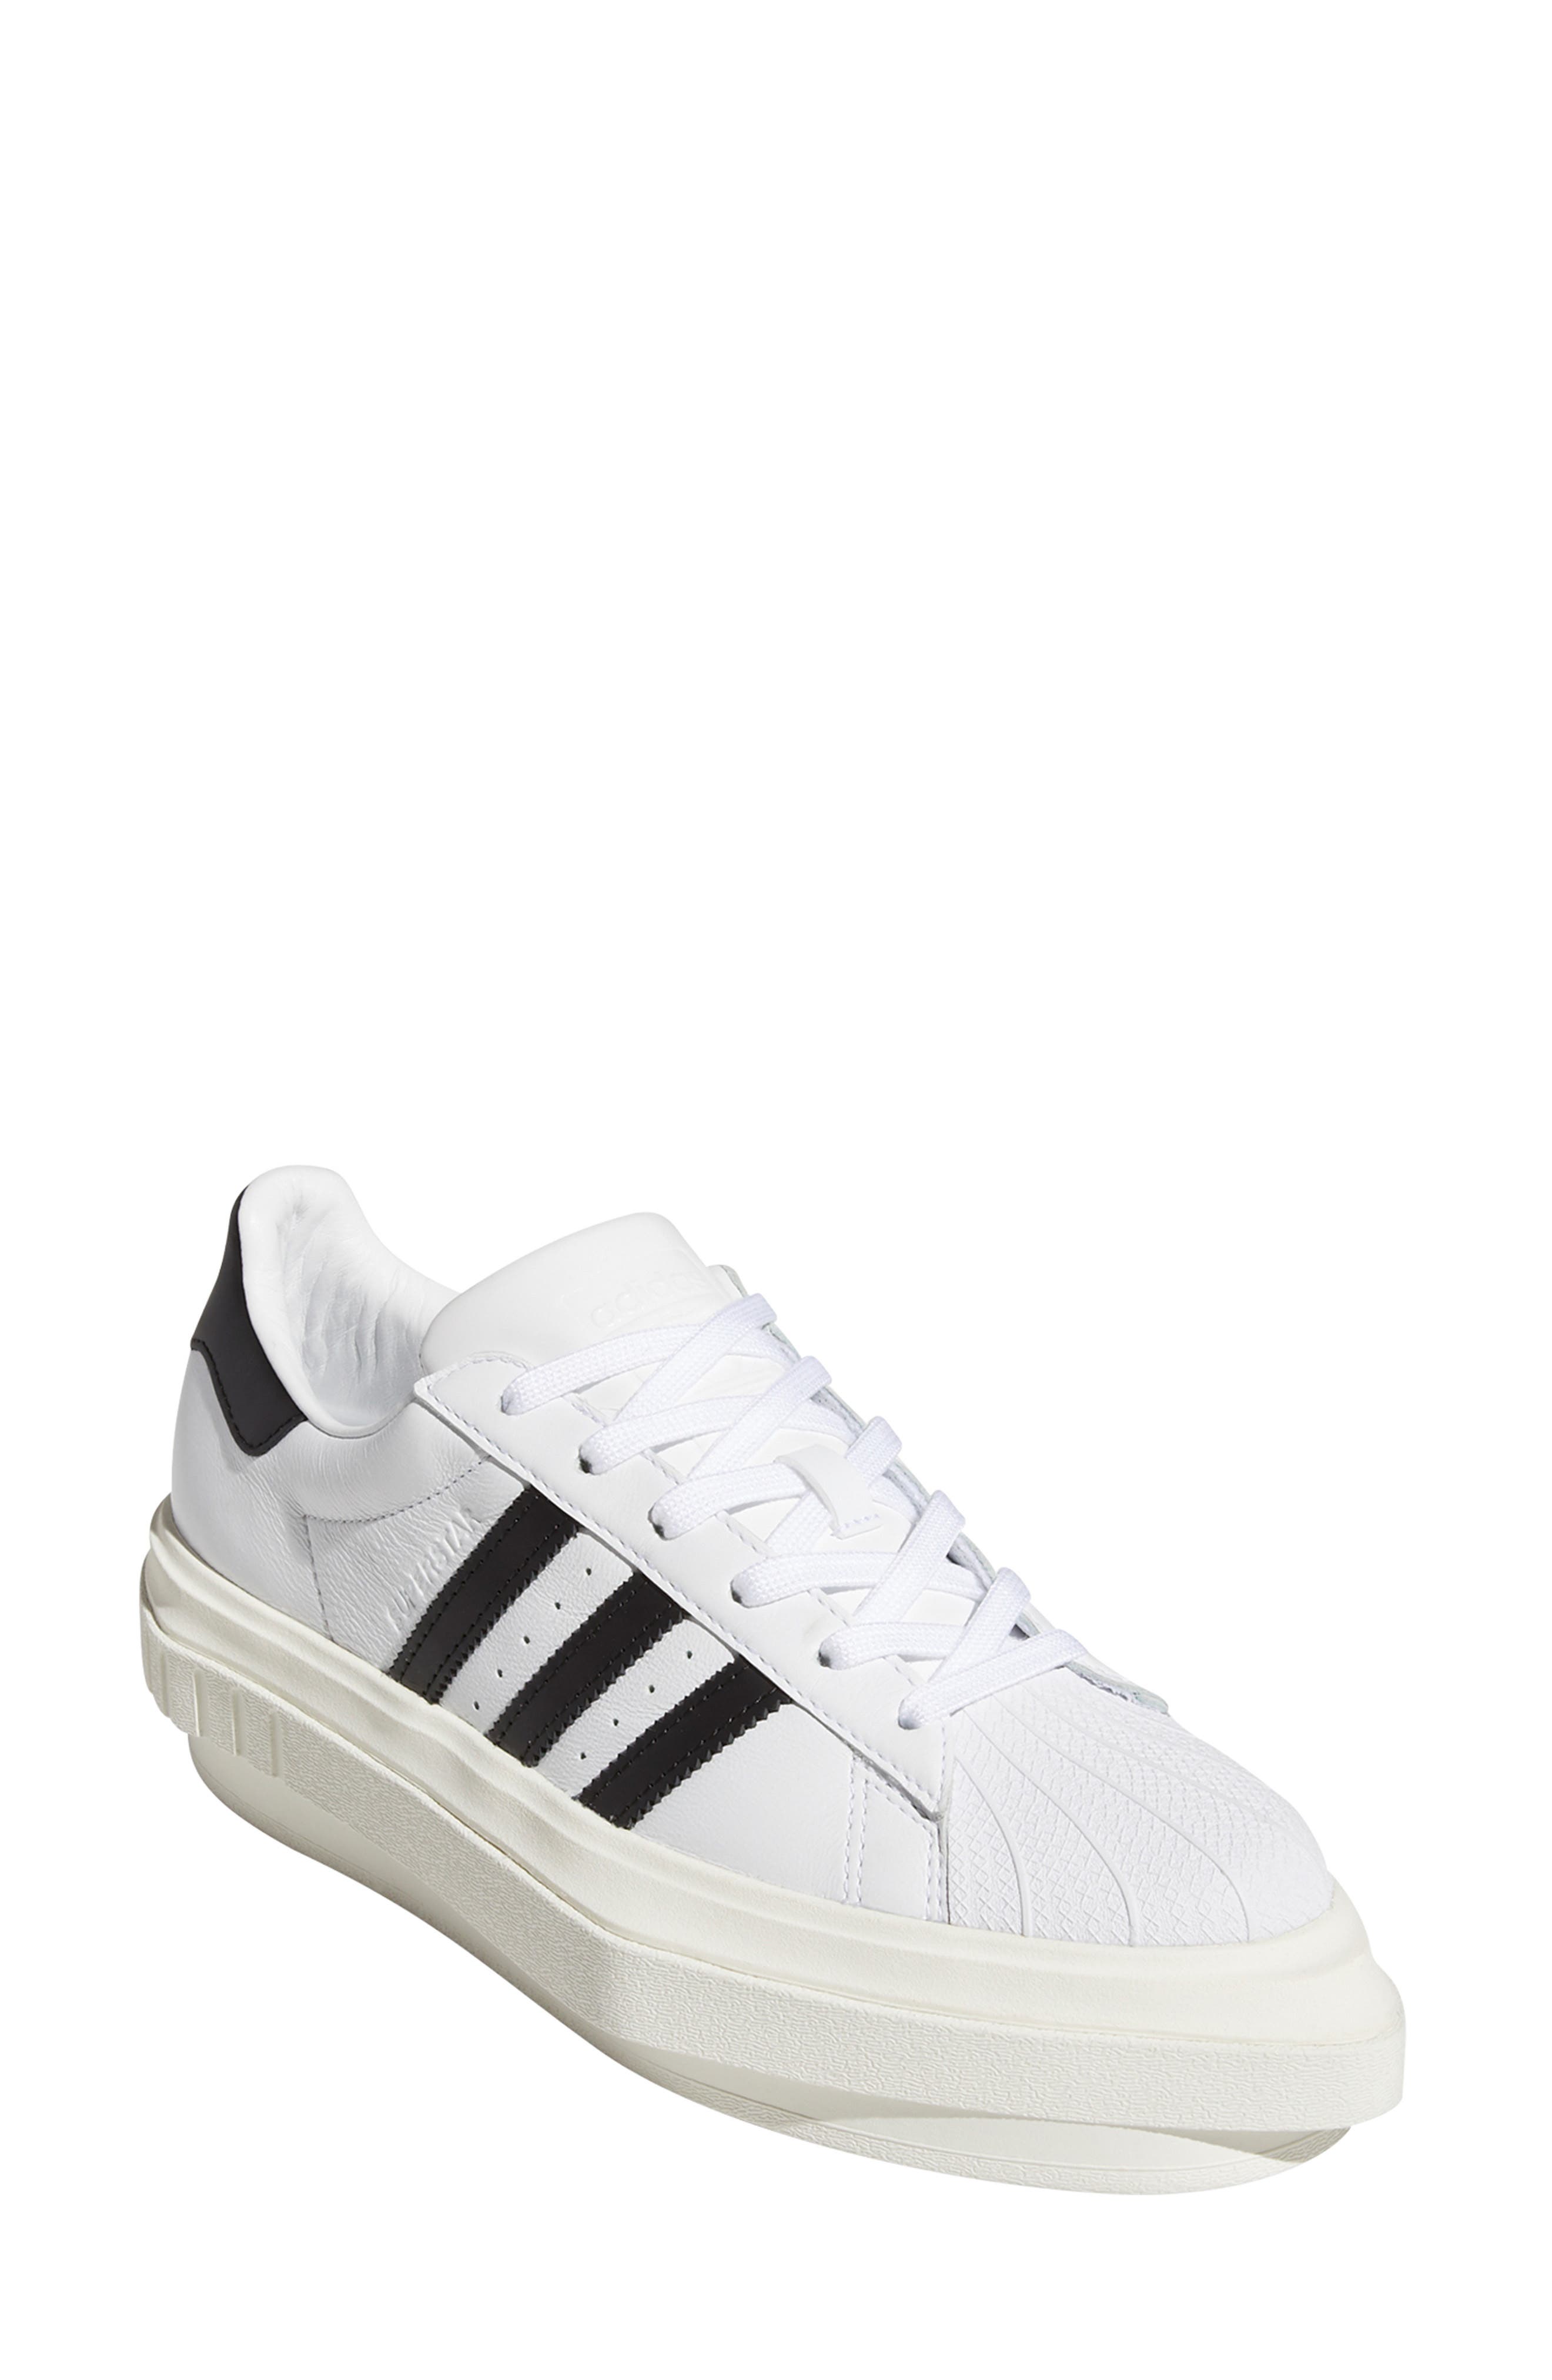 y 3 shoes womens white